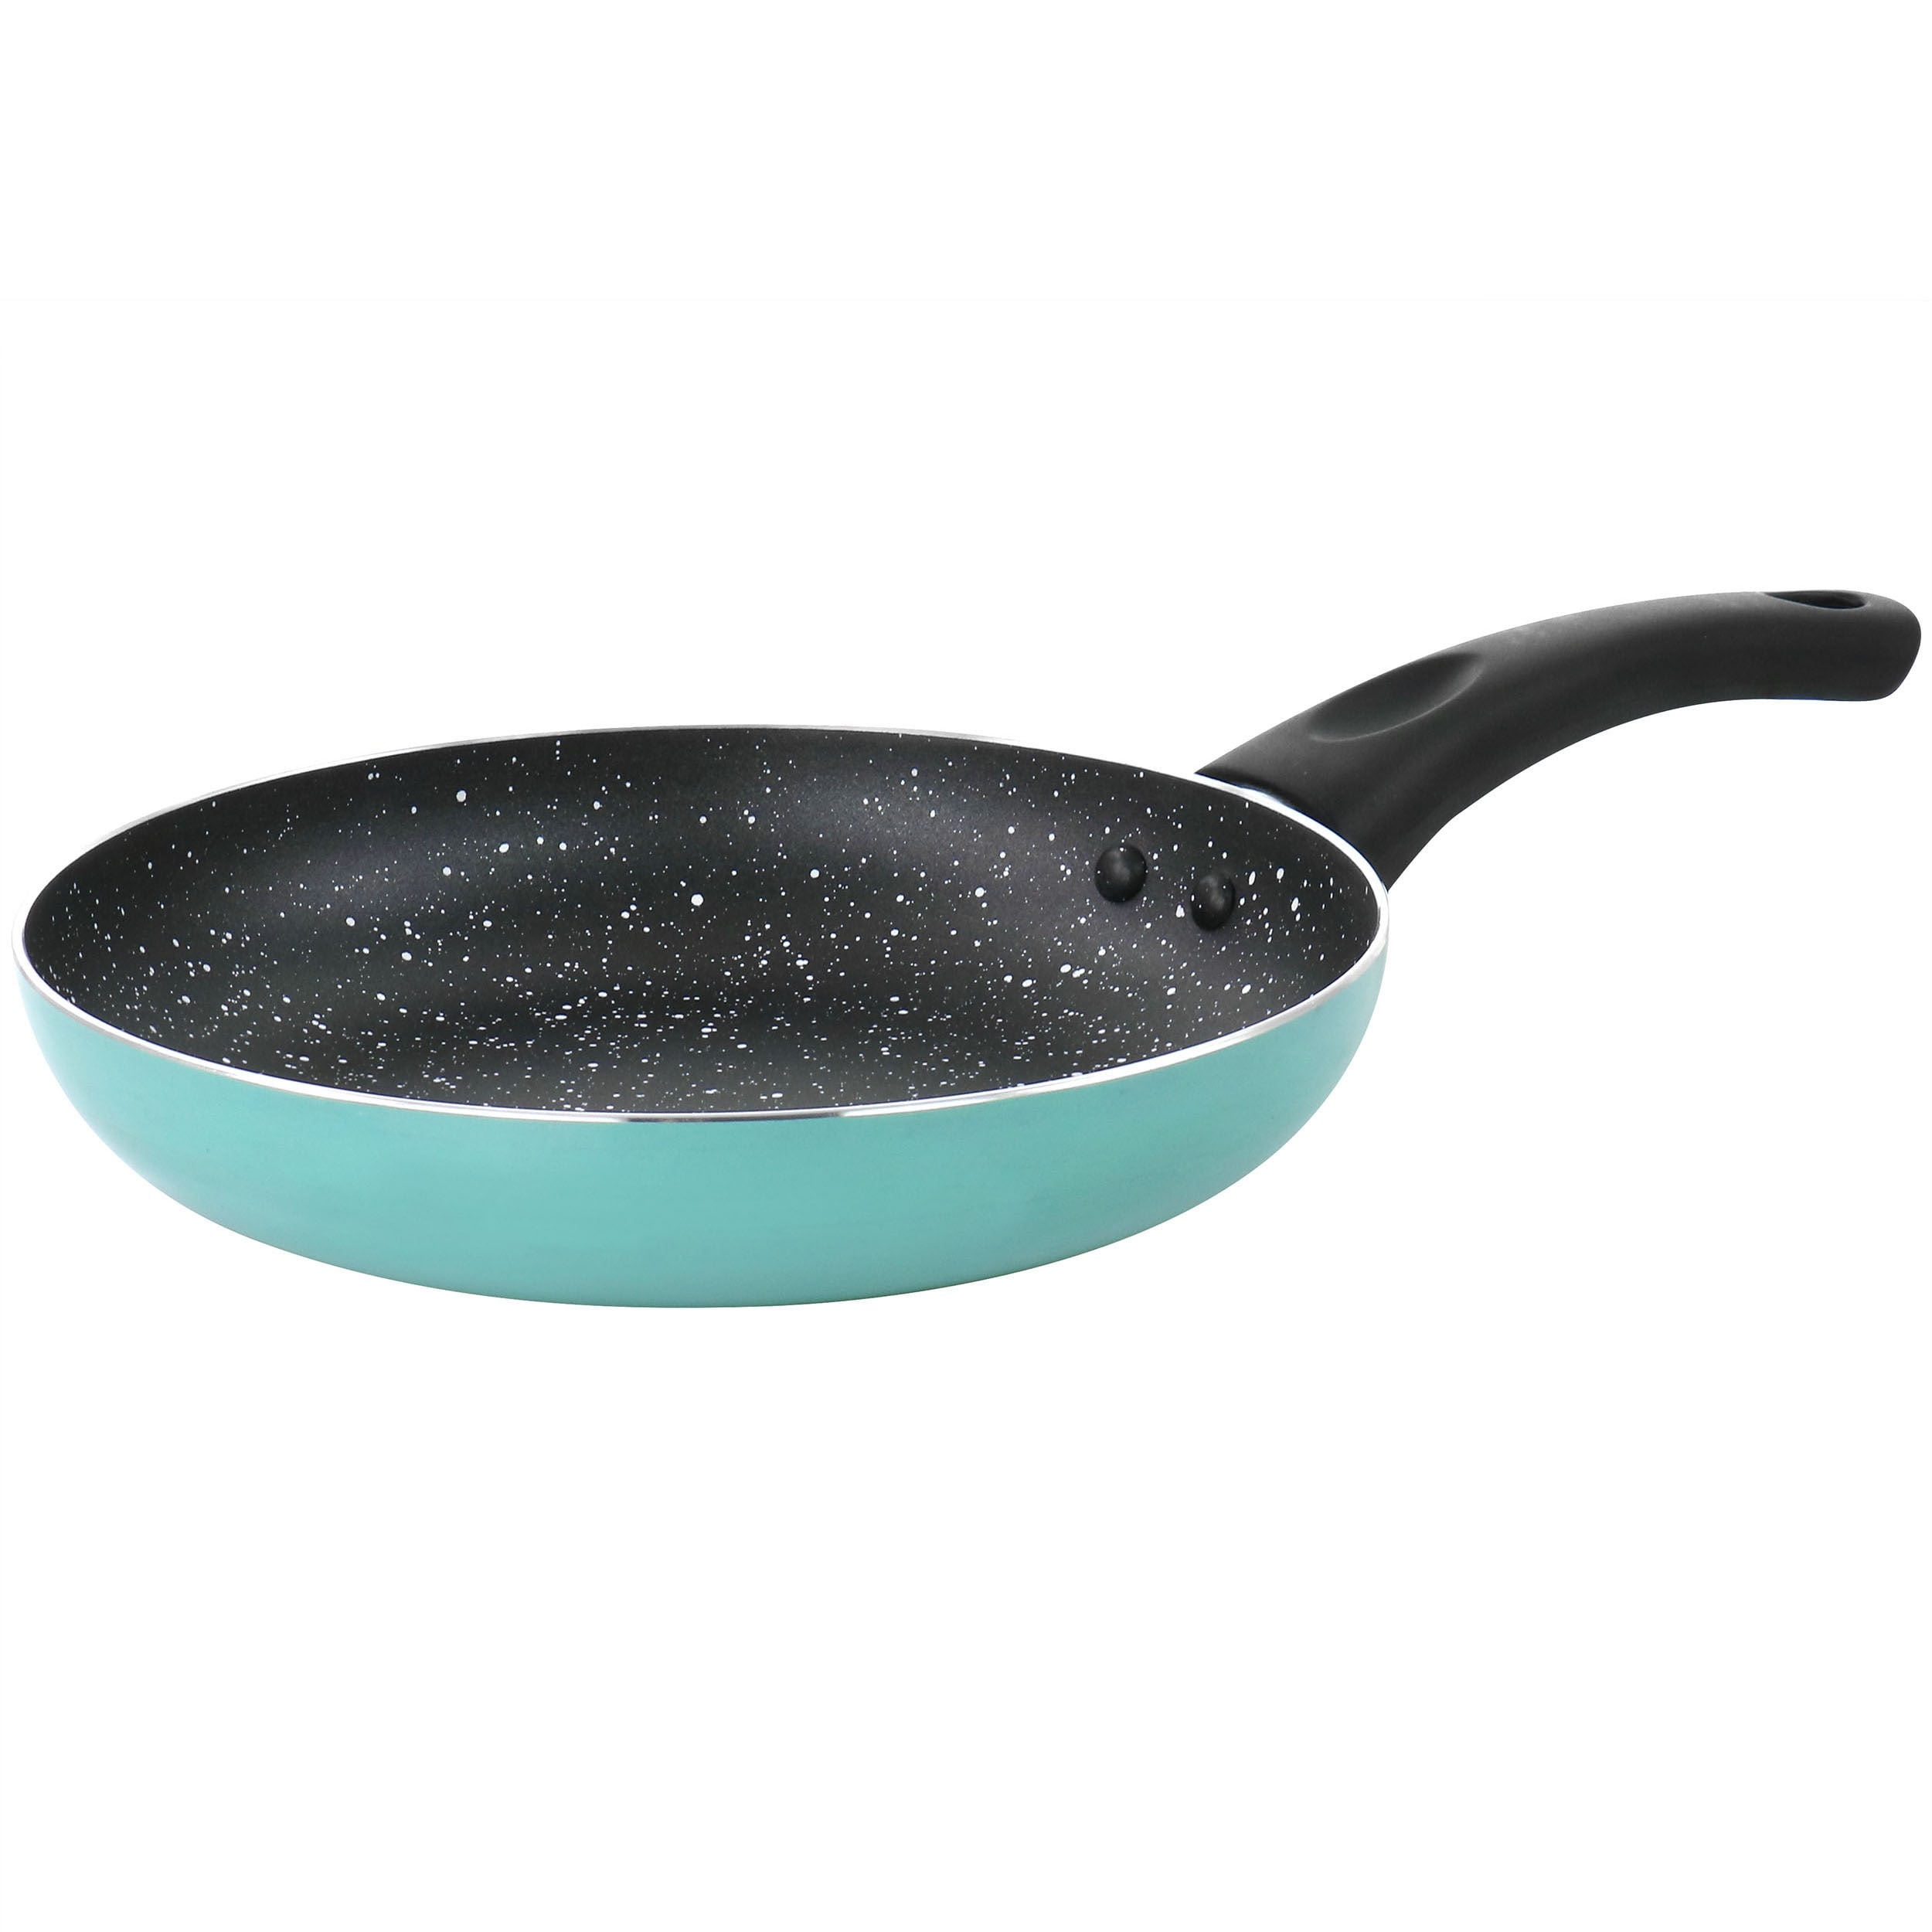 https://ak1.ostkcdn.com/images/products/is/images/direct/e0bdbca244fdf32acc7b248ff801b3e480286c3f/8-in.-Nonstick-Aluminum-Frying-Pan-in-Turquoise.jpg